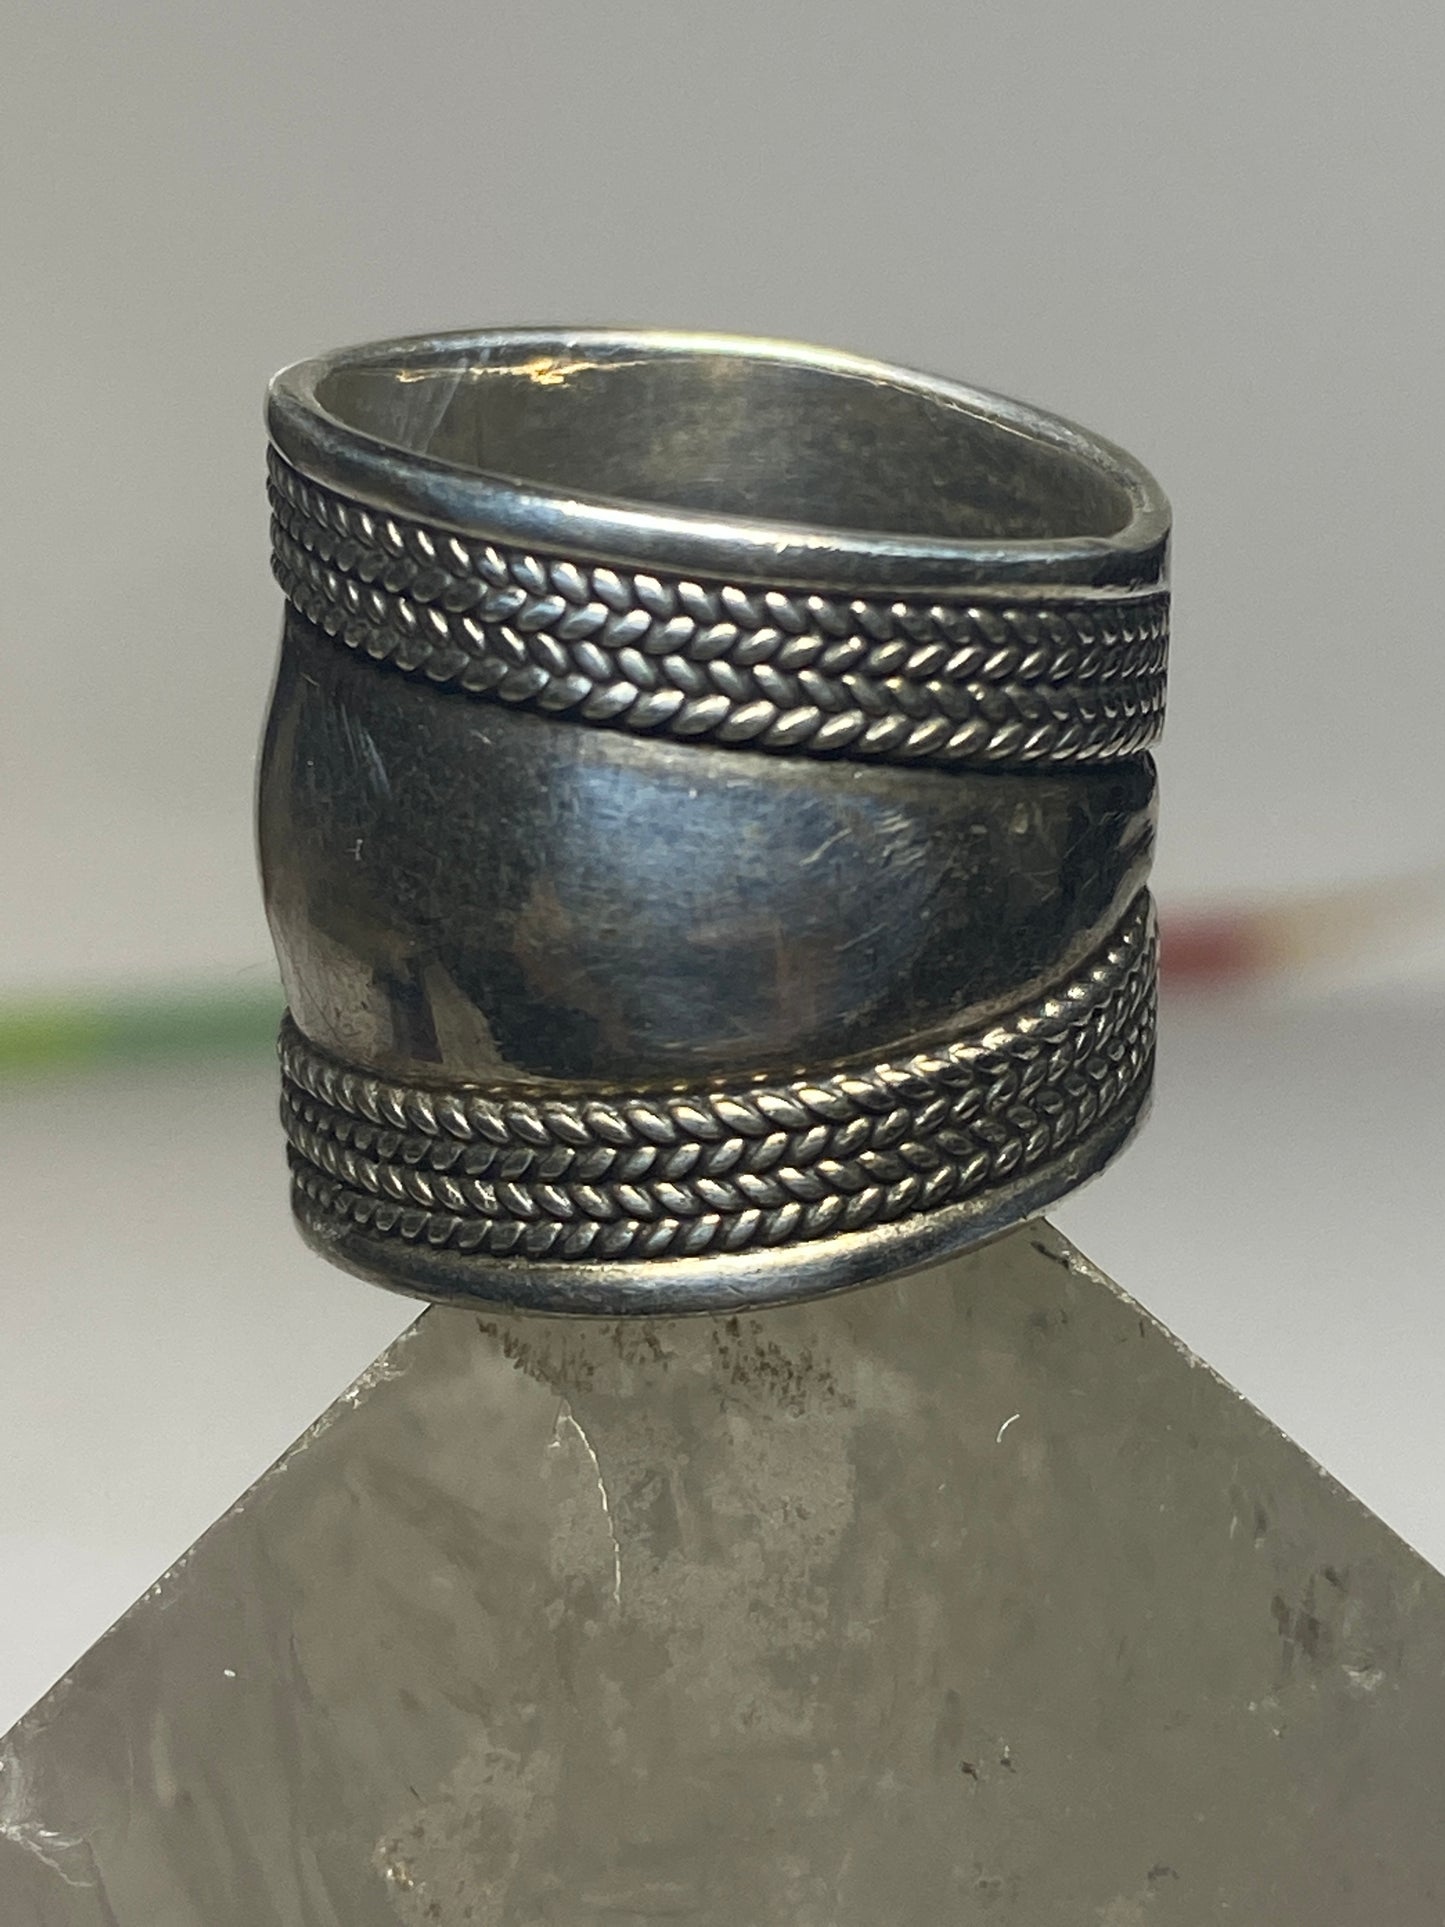 Cigar band ring size 5 rope design sterling silver women girls